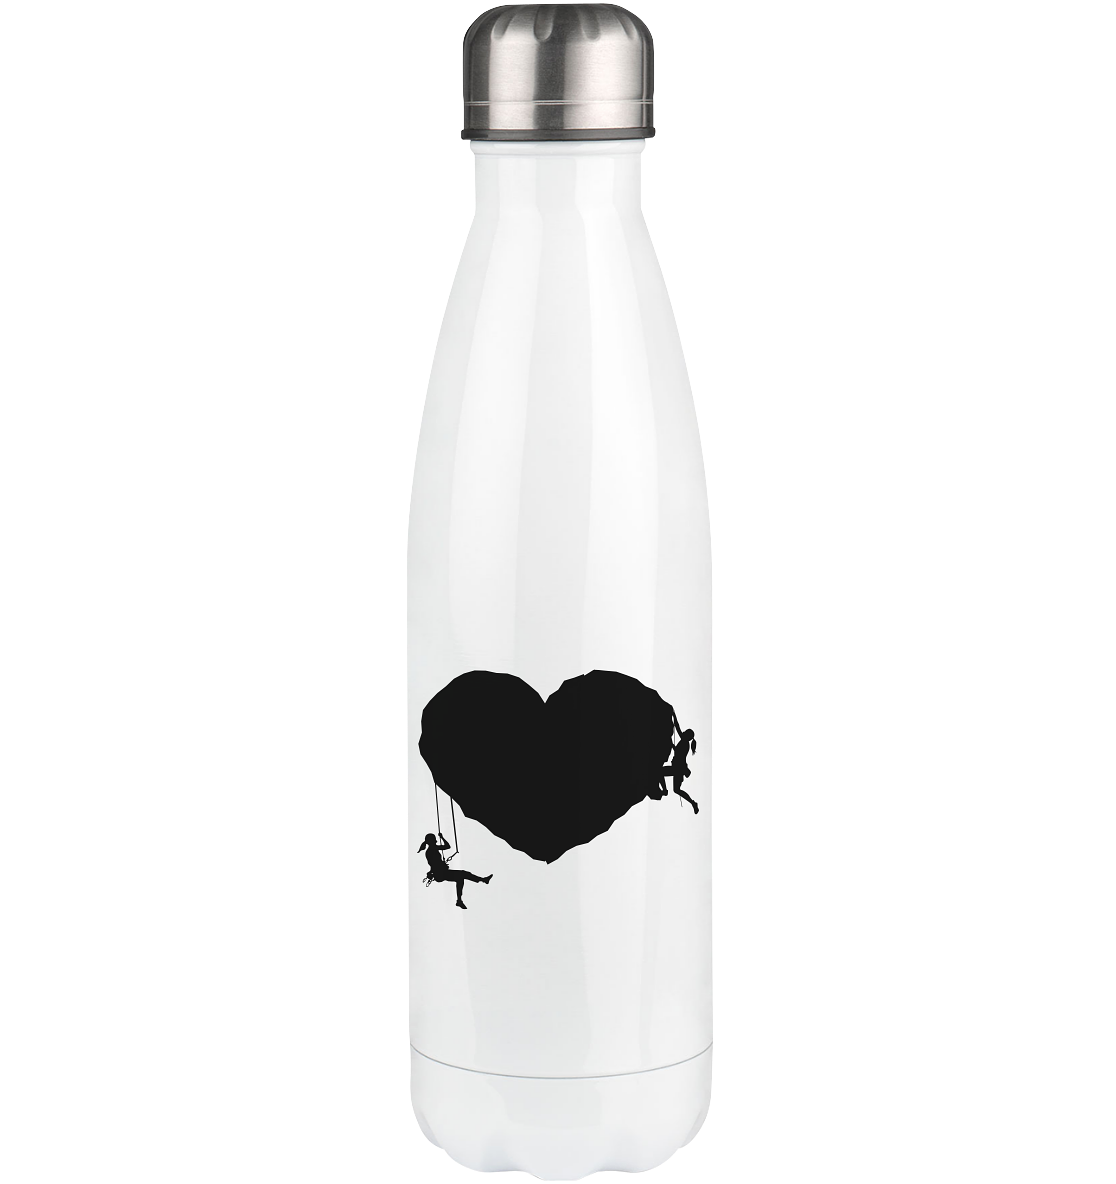 Heart and Climbing - Edelstahl Thermosflasche klettern 500ml